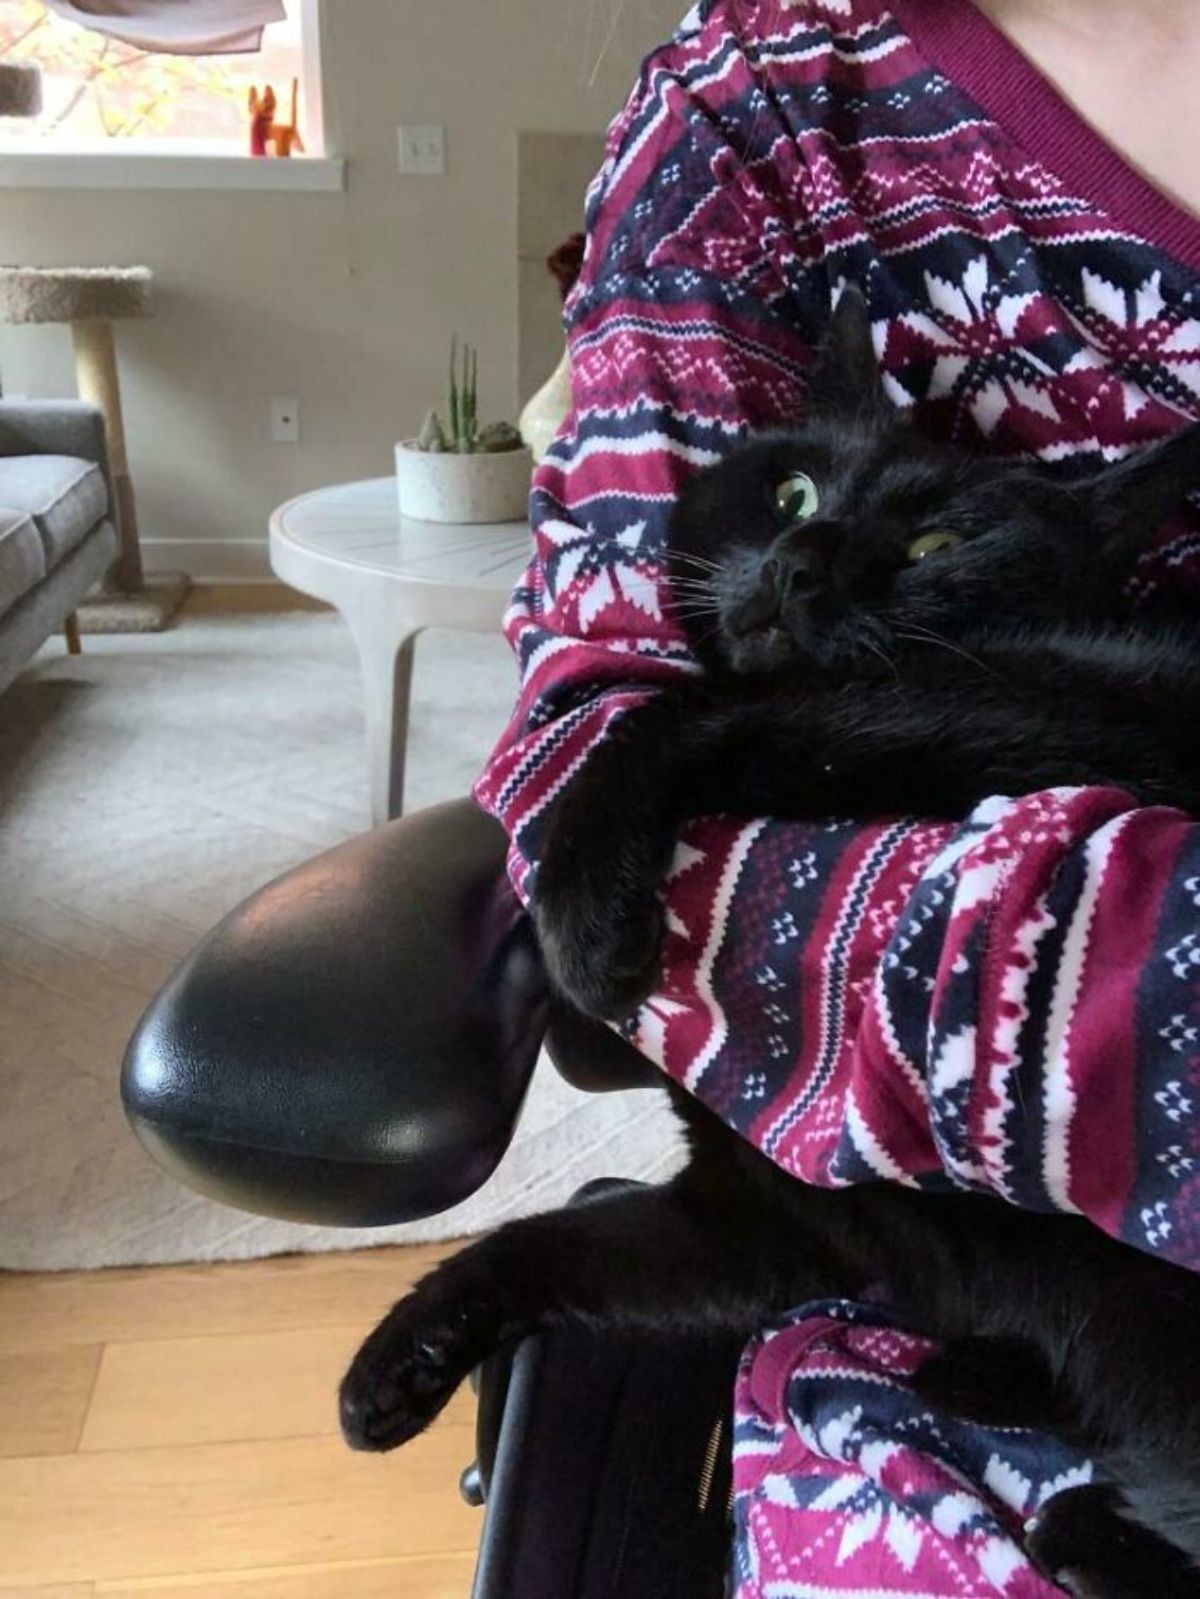 black cat hugged by someone wearing a red blue and white sweater on a black sofa and the cat's face is squished to and has widened eyes